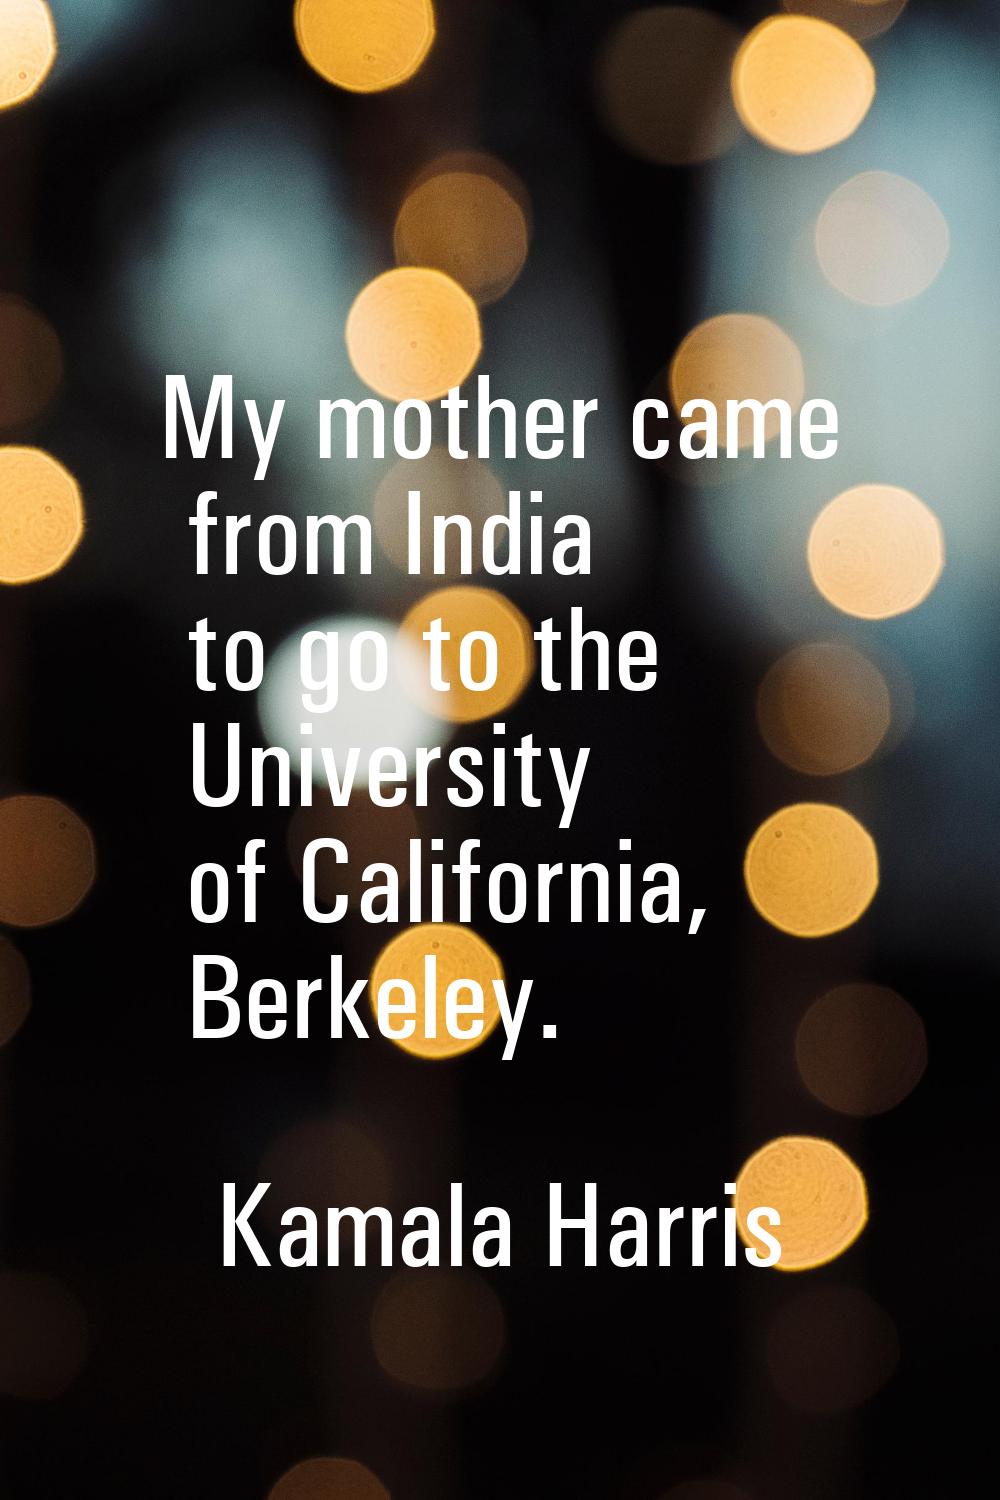 My mother came from India to go to the University of California, Berkeley.